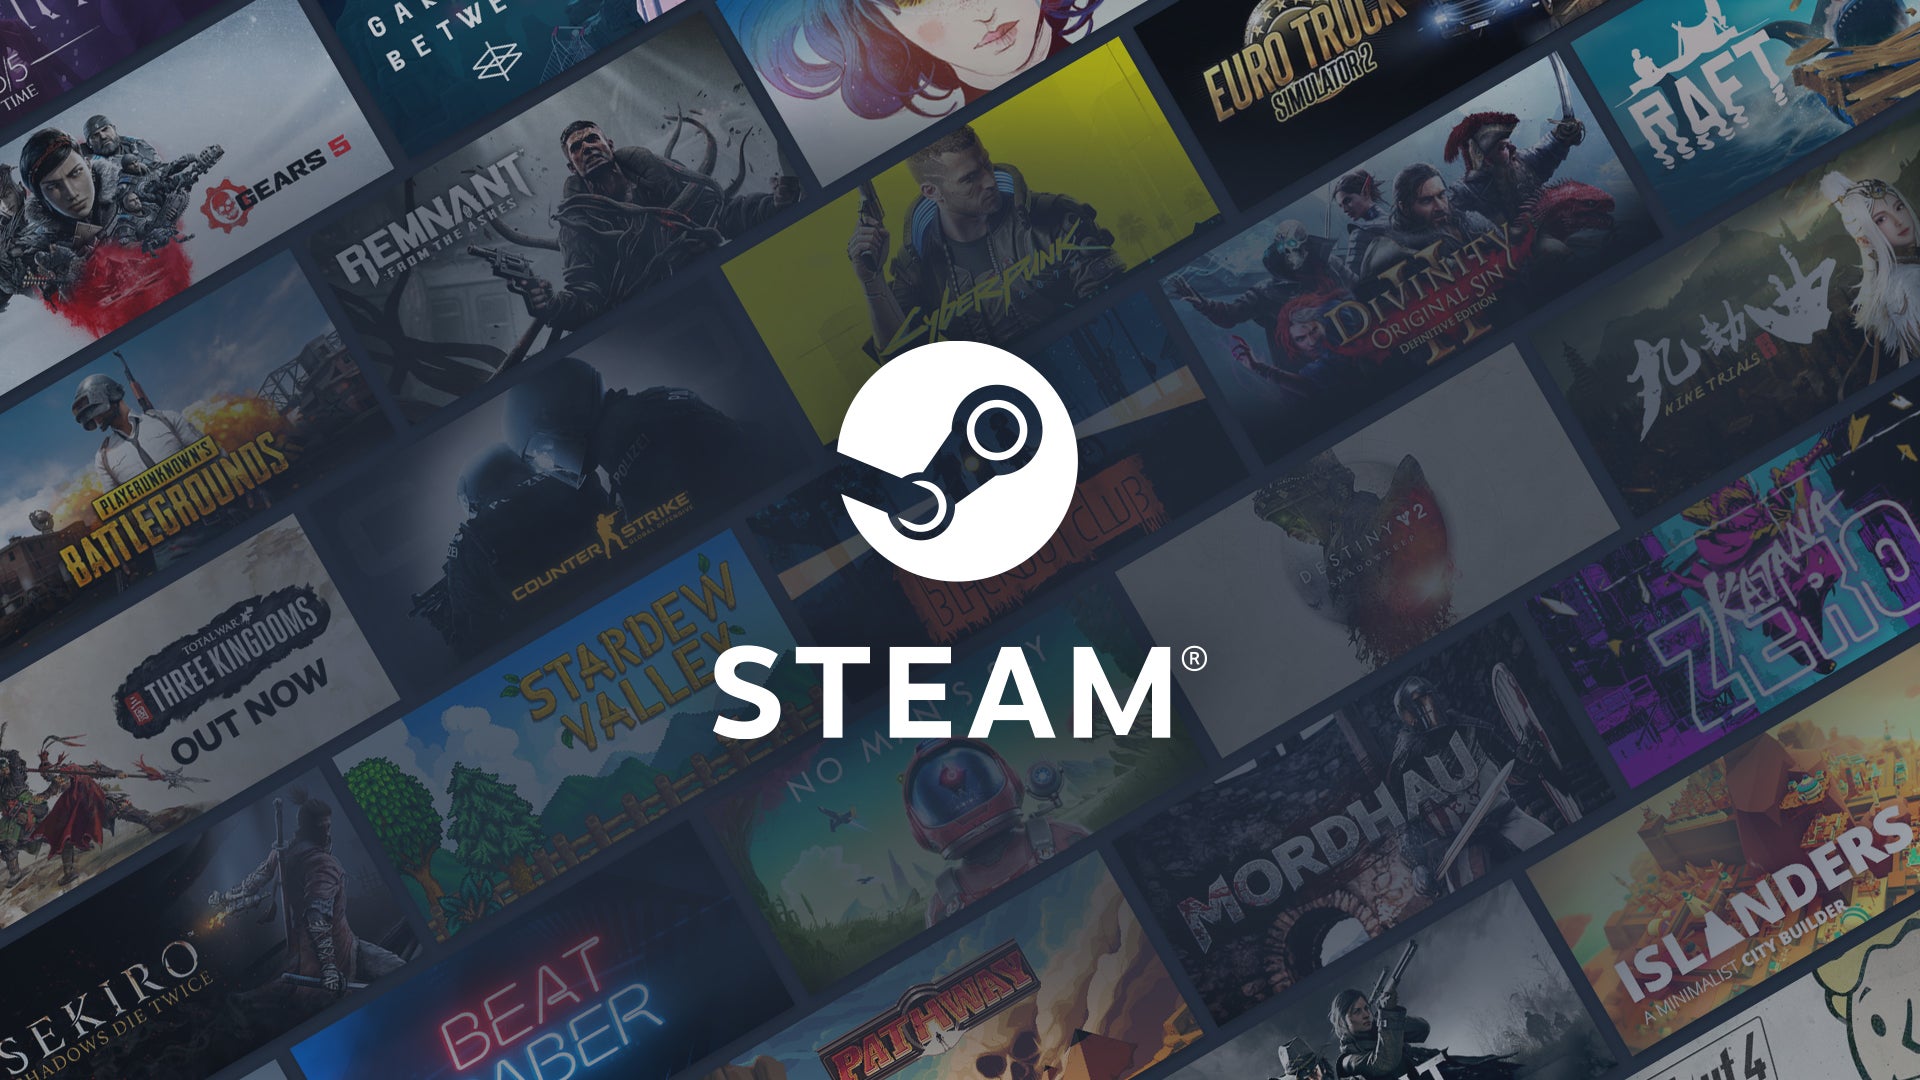 The Steam logo appears with pieces of the game's art in the background.